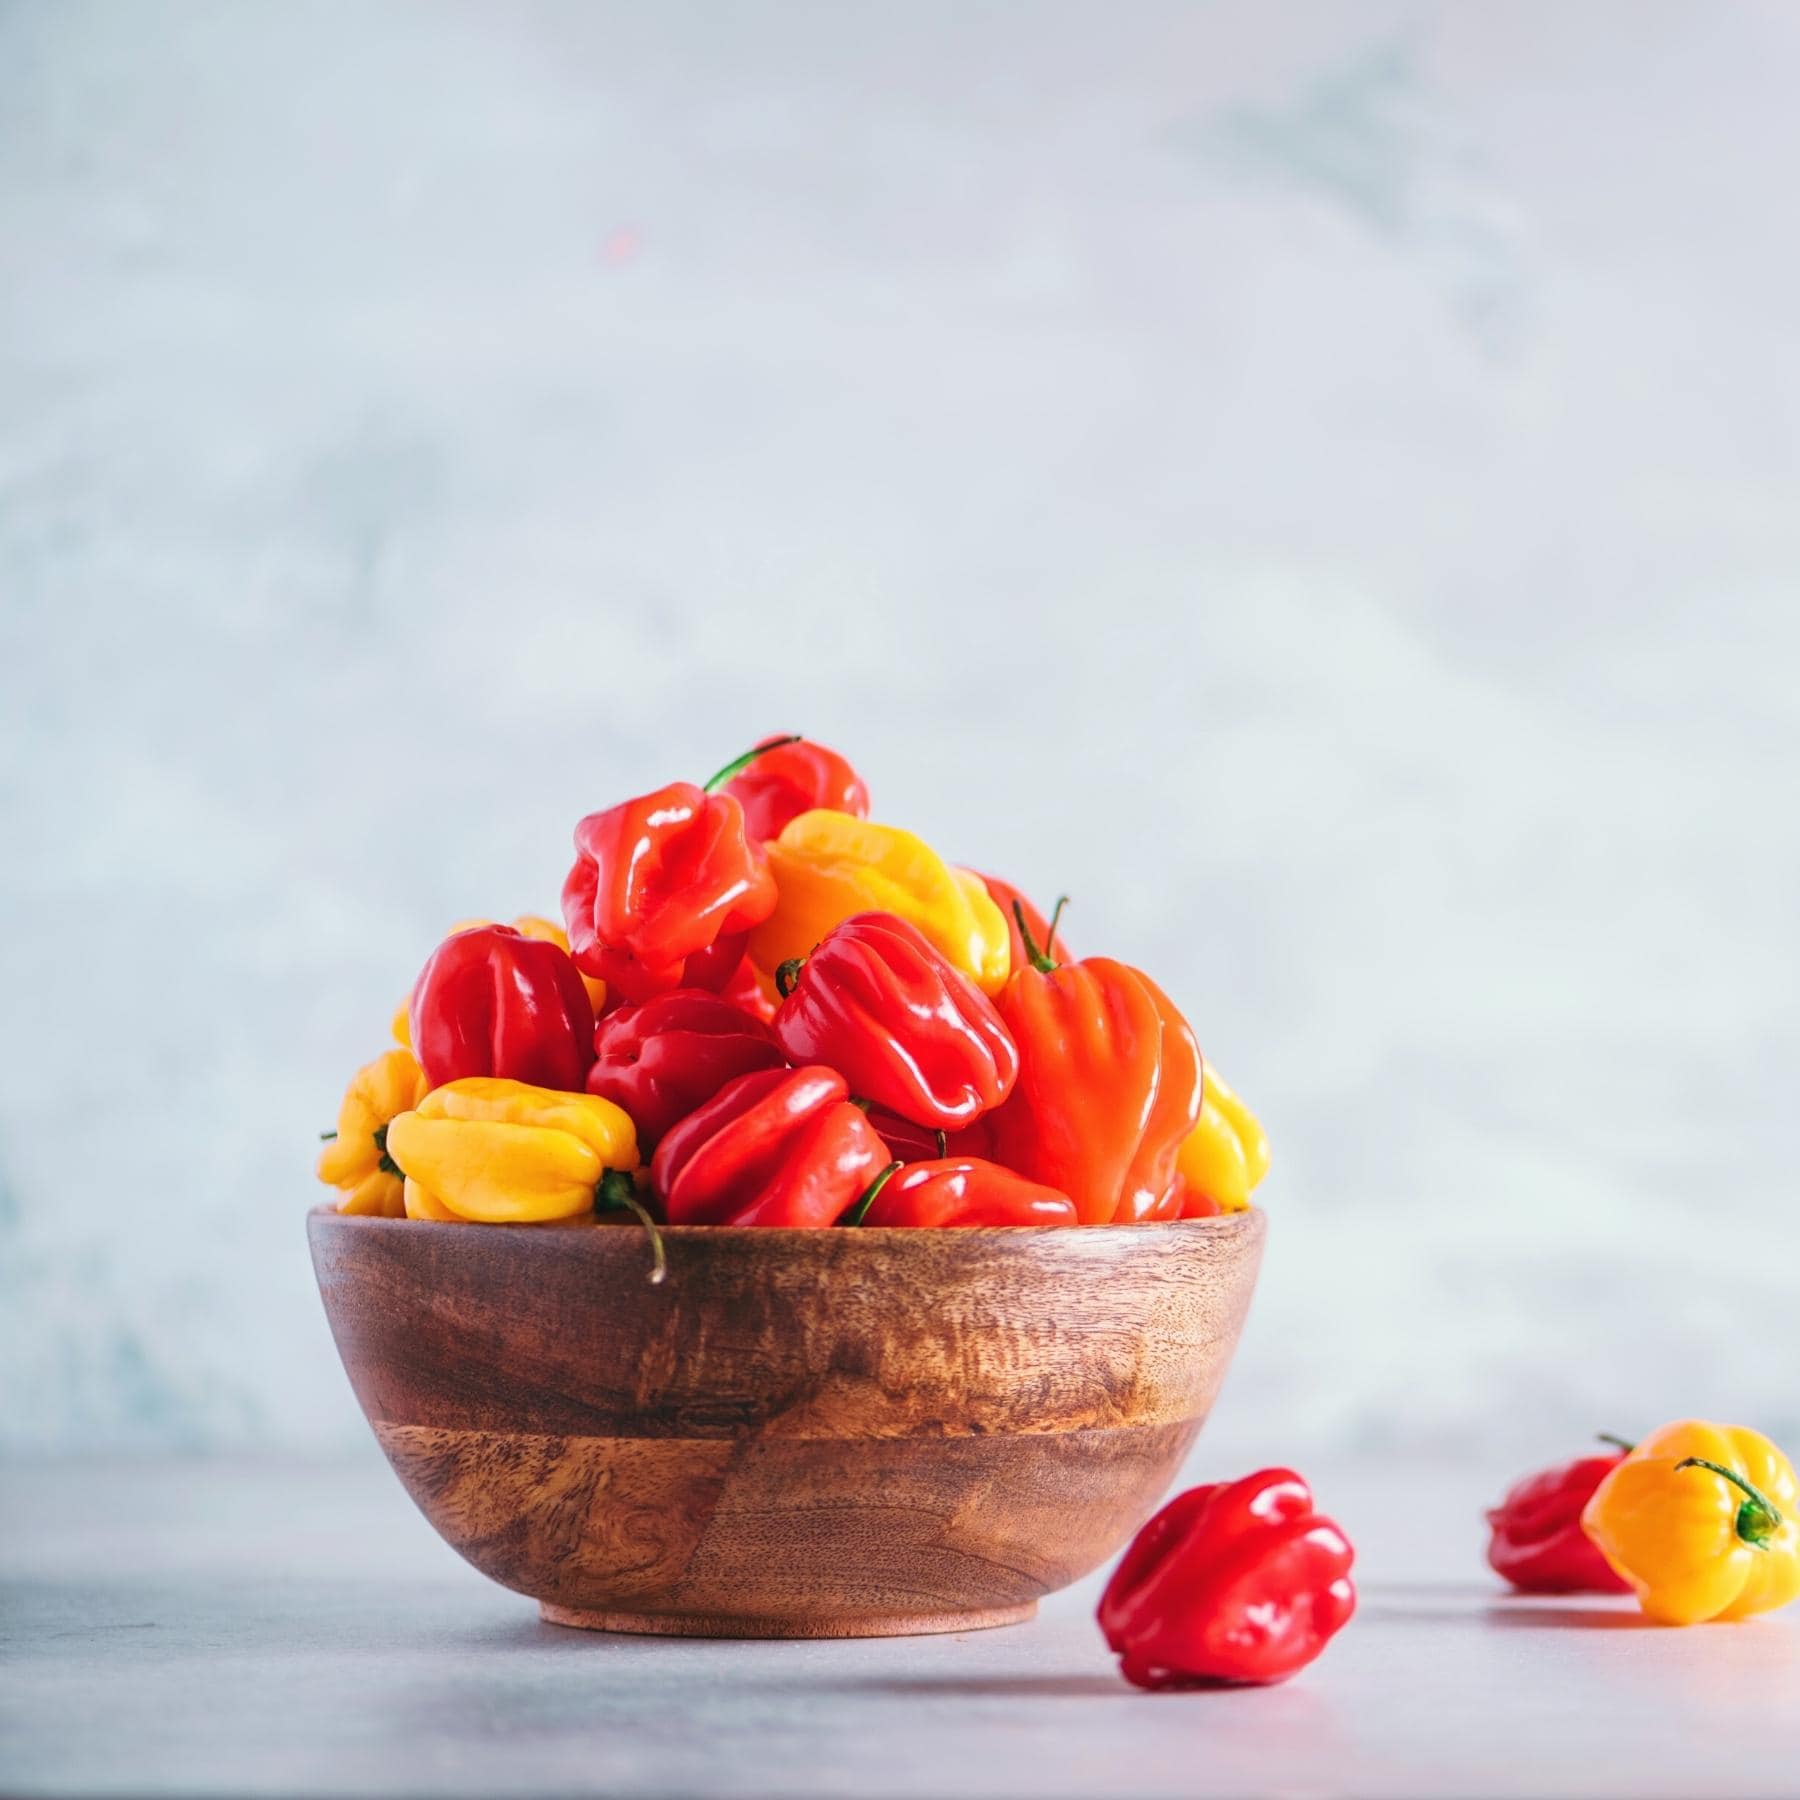 A wooden bowl filled with fresh, colorful scotch bonnet peppers.